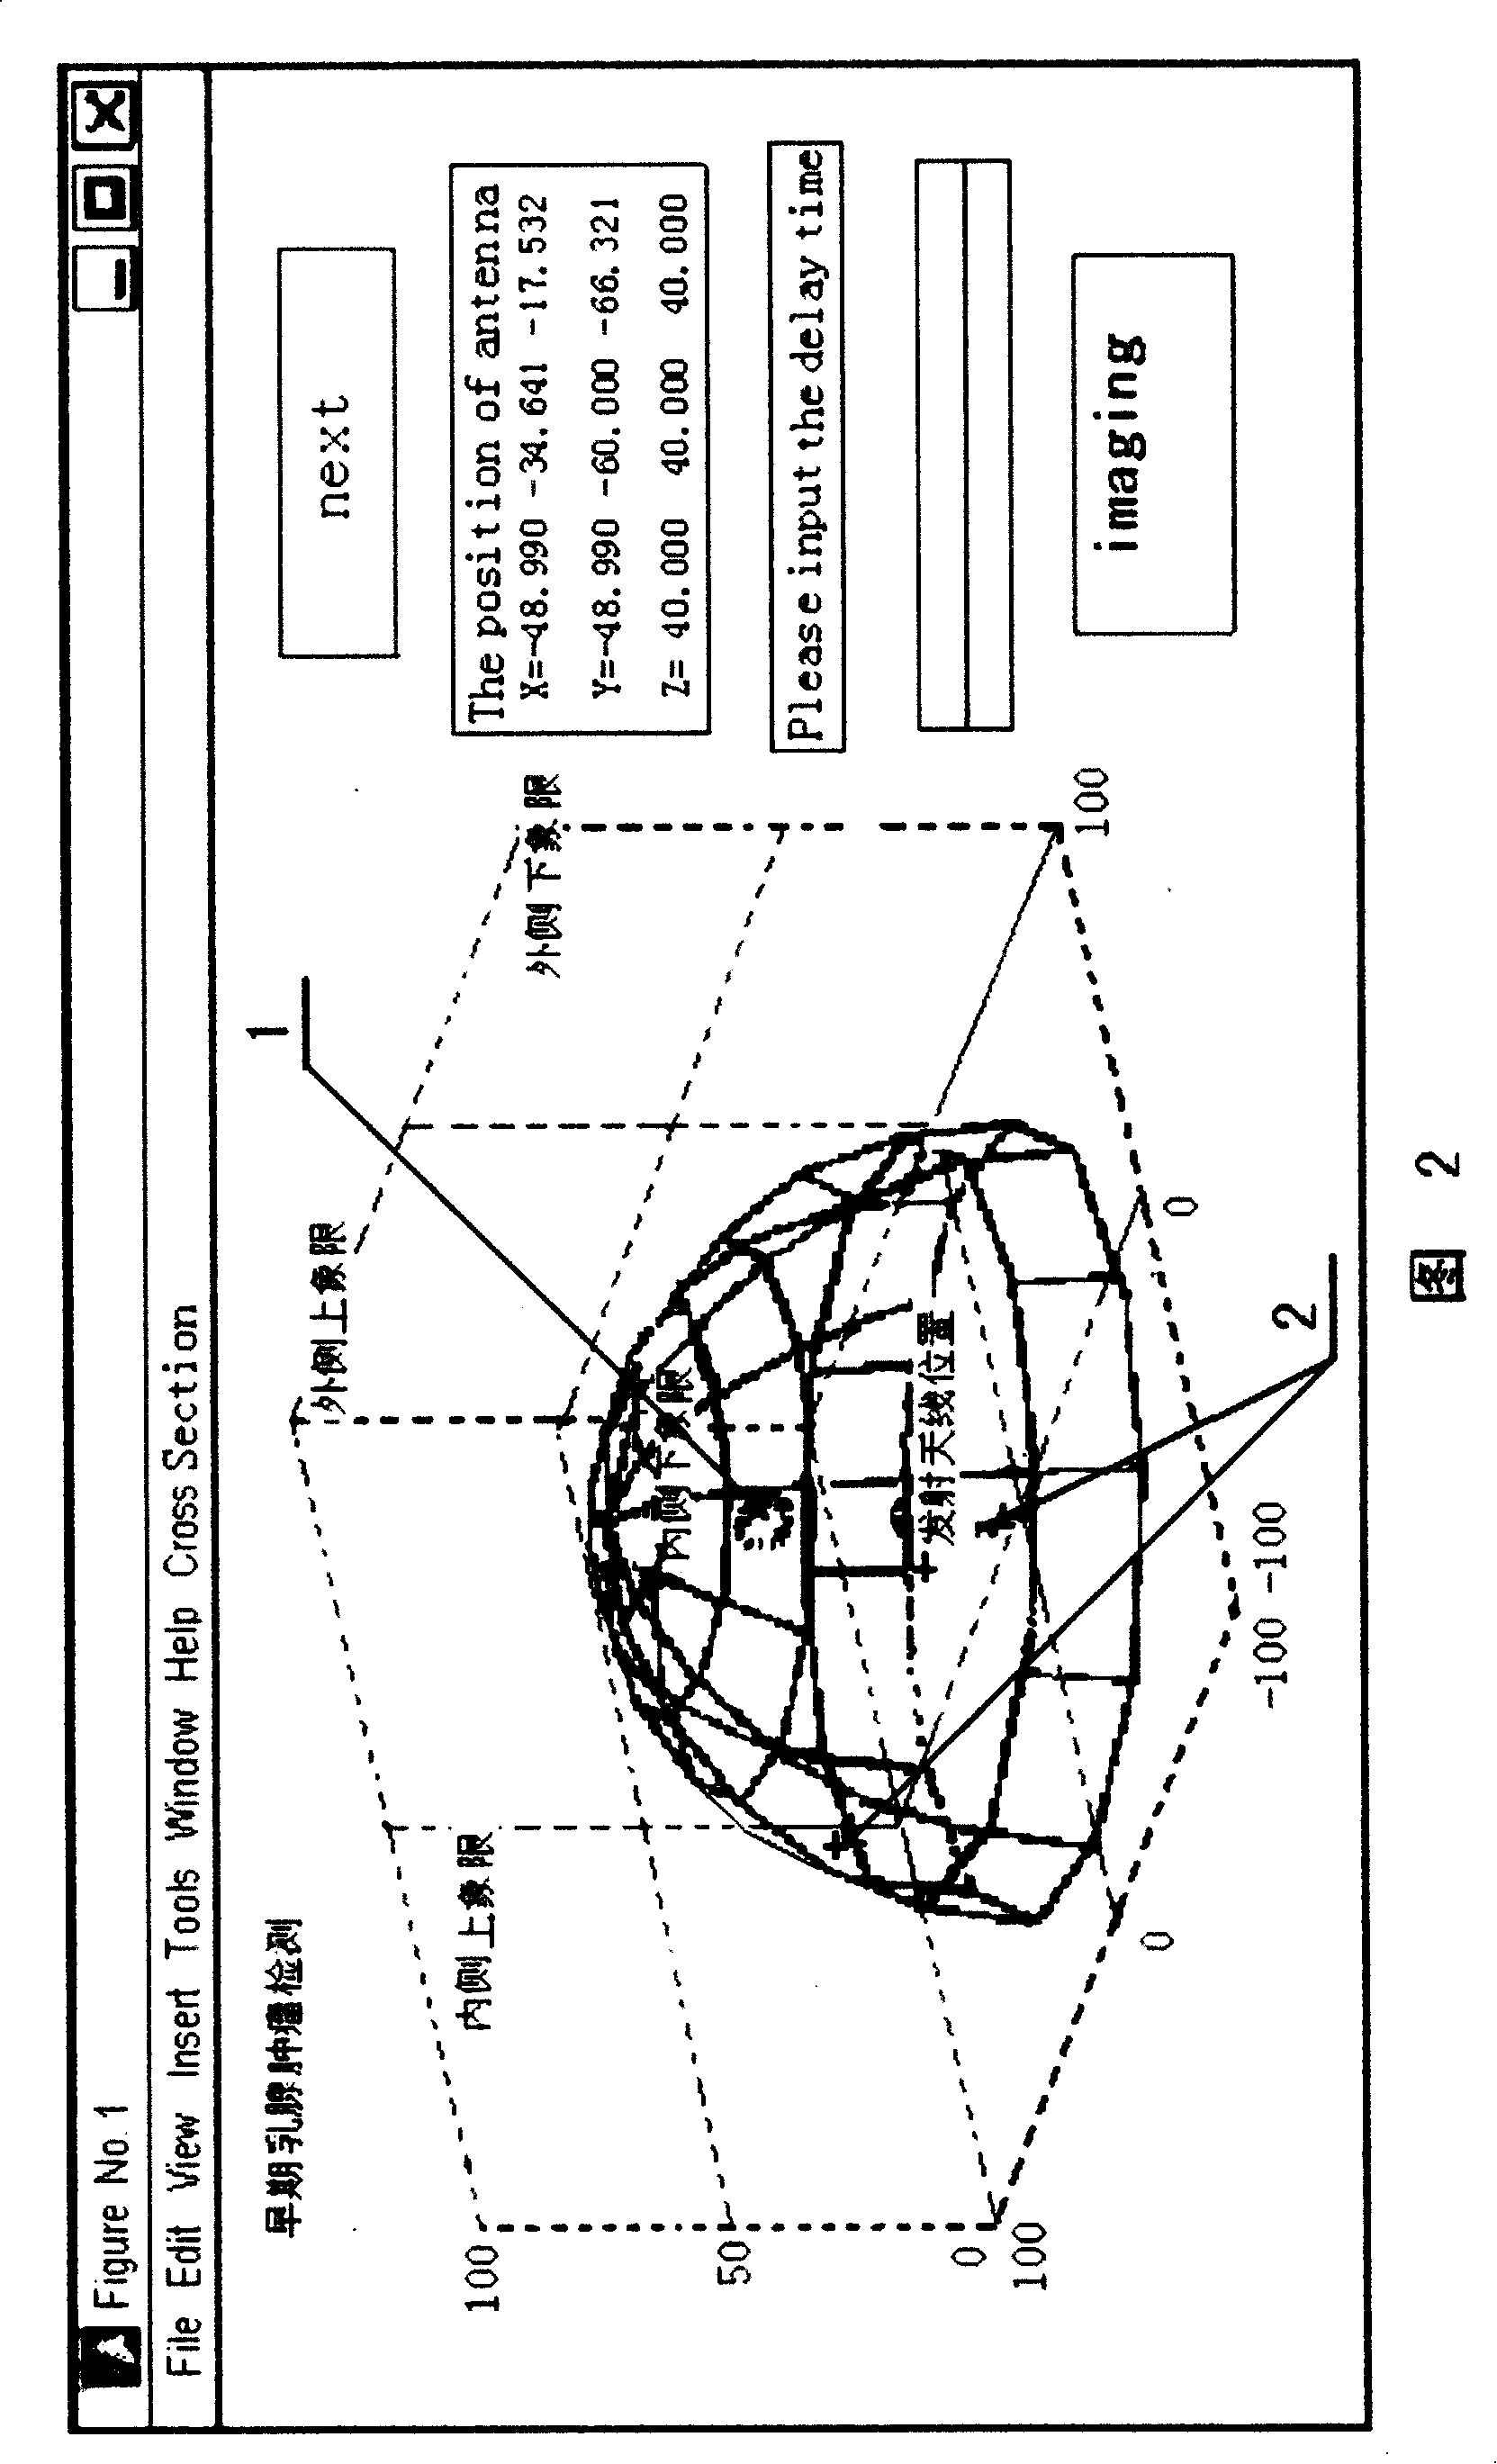 Microwave near-field medicine body detecting method and use thereof